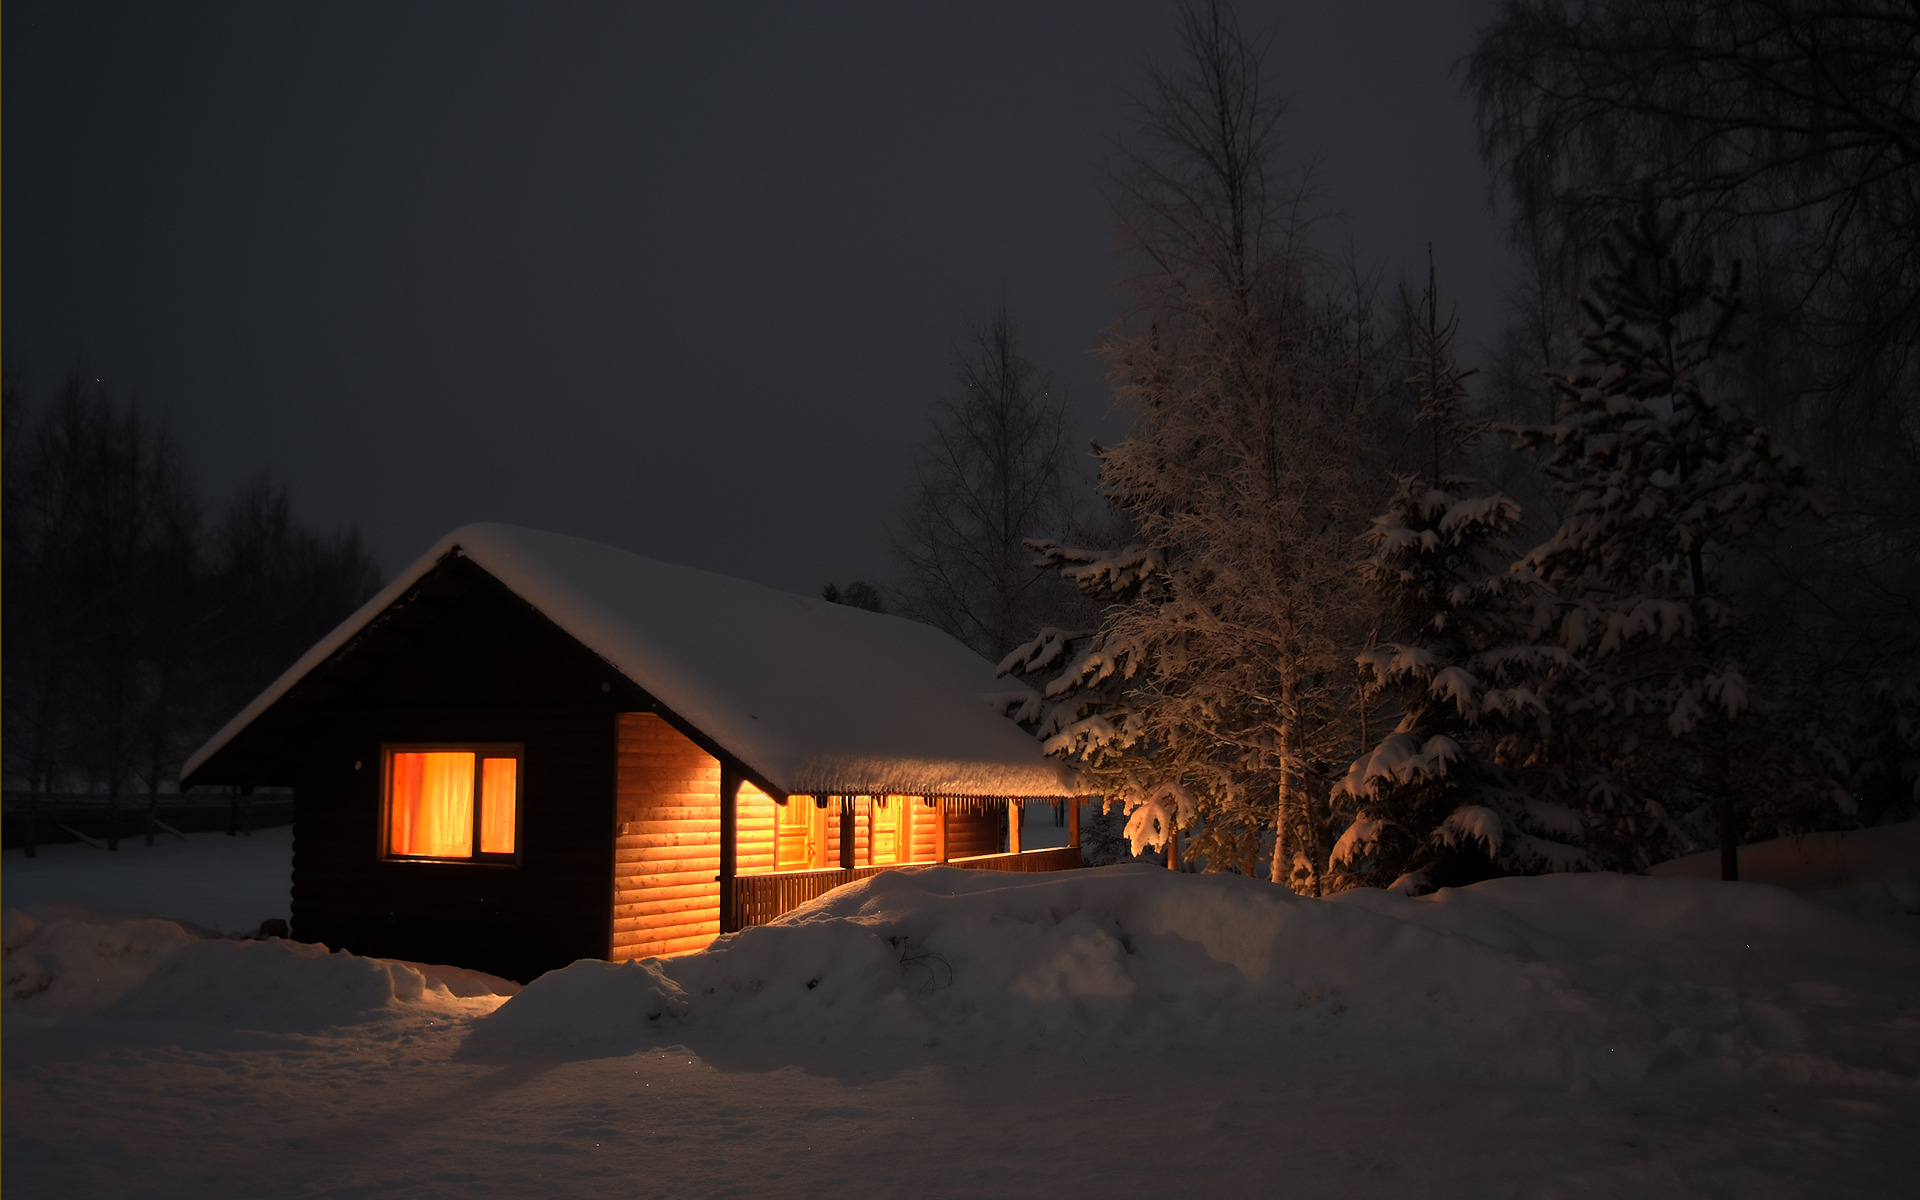 snow on cabin in woods Wallpaper Background 54539